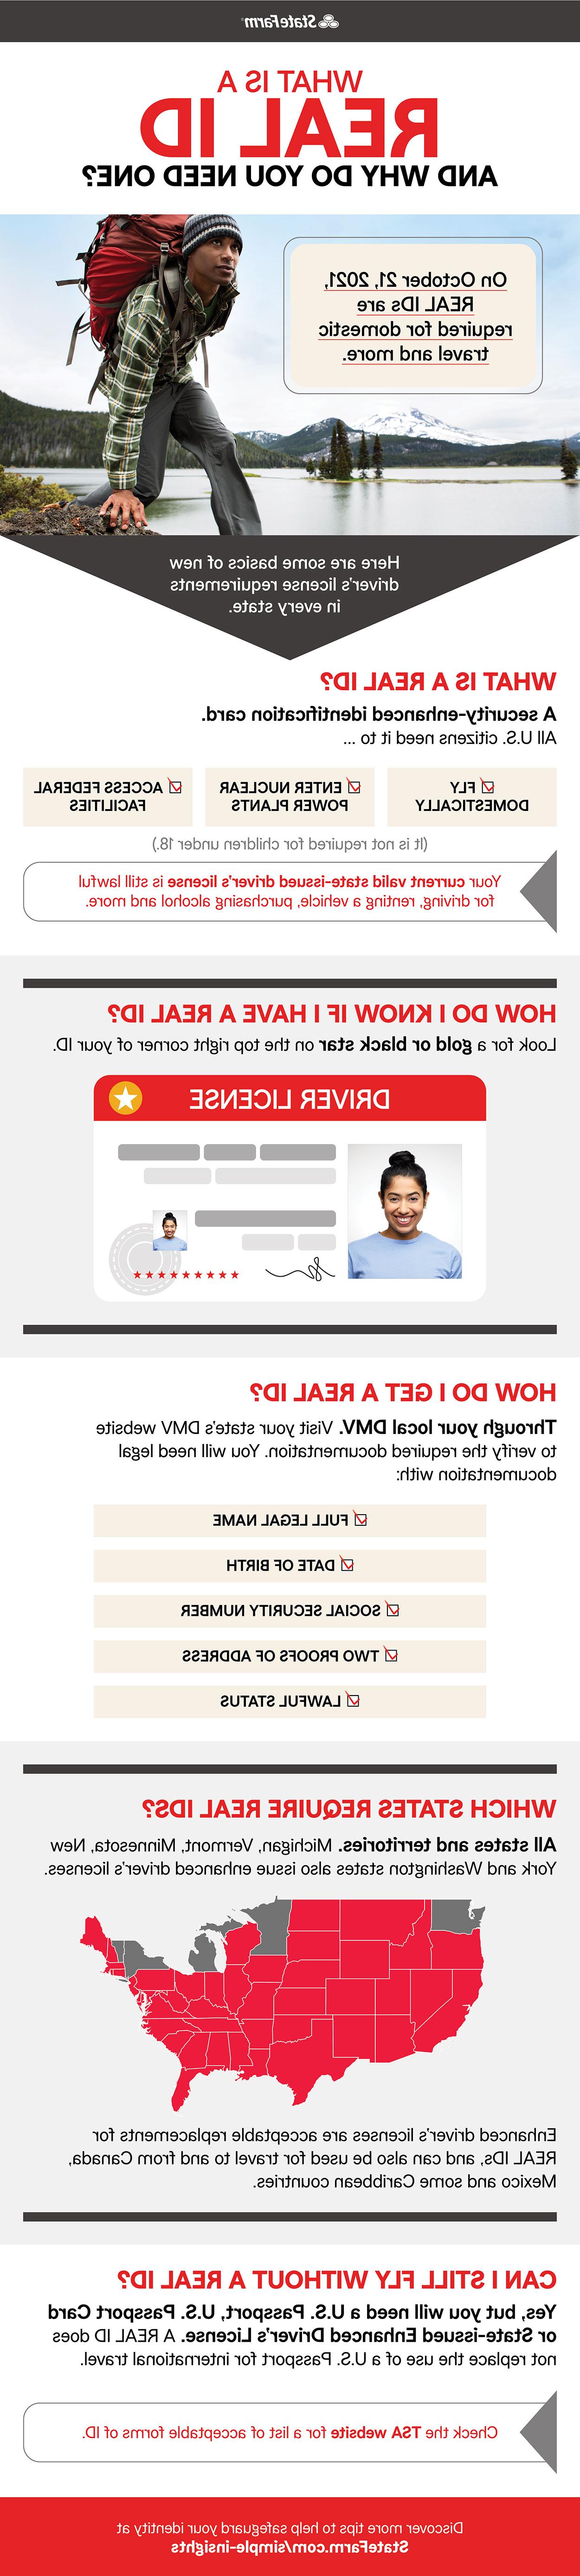 Infographic that shows why you need a REAL ID and what it is.